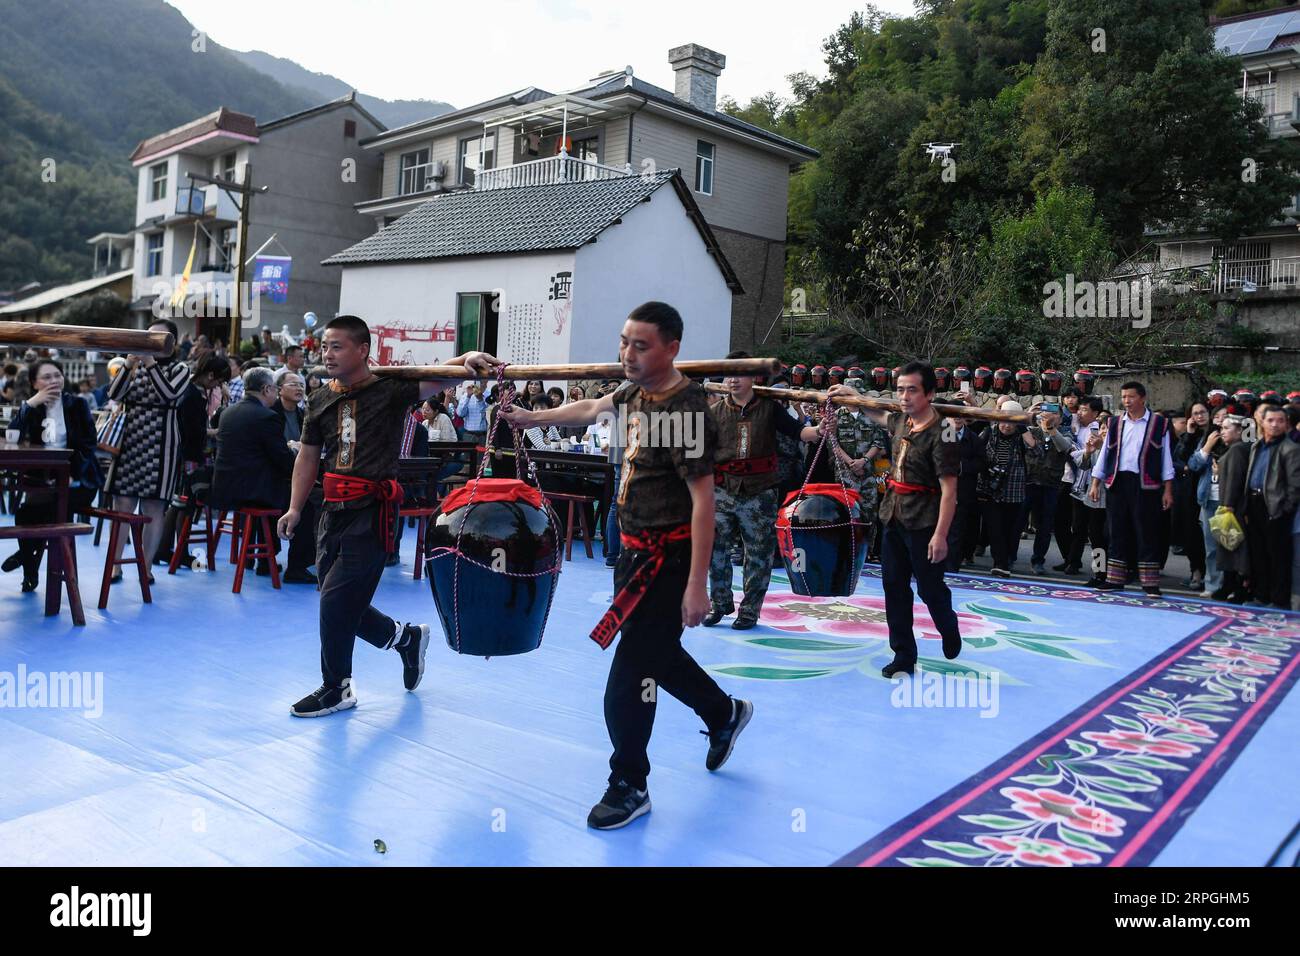 191016 -- HANGZHOU, Oct. 16, 2019 -- Local villagers carry jars of wine during the long-table banquet held at Longfeng ethnic village in Eshan Township of the She ethnic group of Tonglu County, east China s Zhejiang Province, Oct. 16, 2019. More than 90 tables of delicacies were presented at the long-table banquet, attracting local villagers as well as tourists to enjoy the food of the She ethnic group.  CHINA-ZHEJIANG-ESHAN-LONG-TABLE BANQUET CN HuangxZongzhi PUBLICATIONxNOTxINxCHN Stock Photo